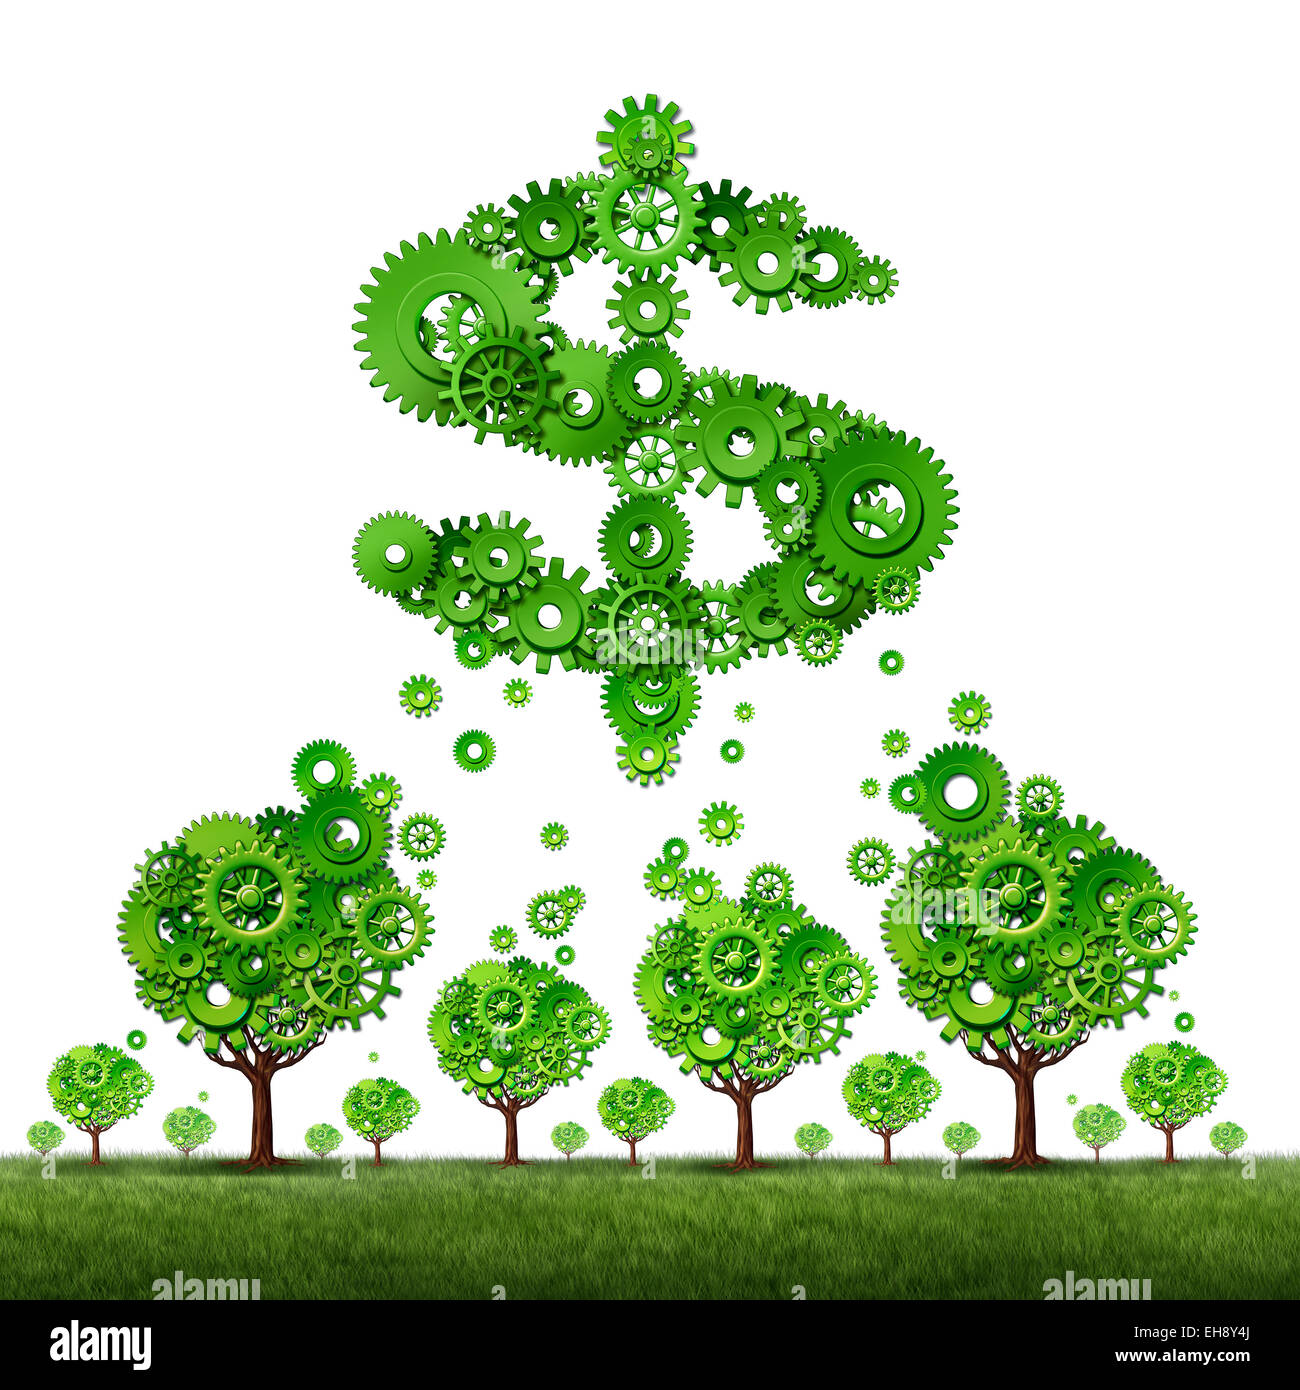 crowdfunding investing and collective income concept as a group of green trees made of gears contributing to a dollar sign symbol shaped with cog wheels as a crowd funding idea. Stock Photo